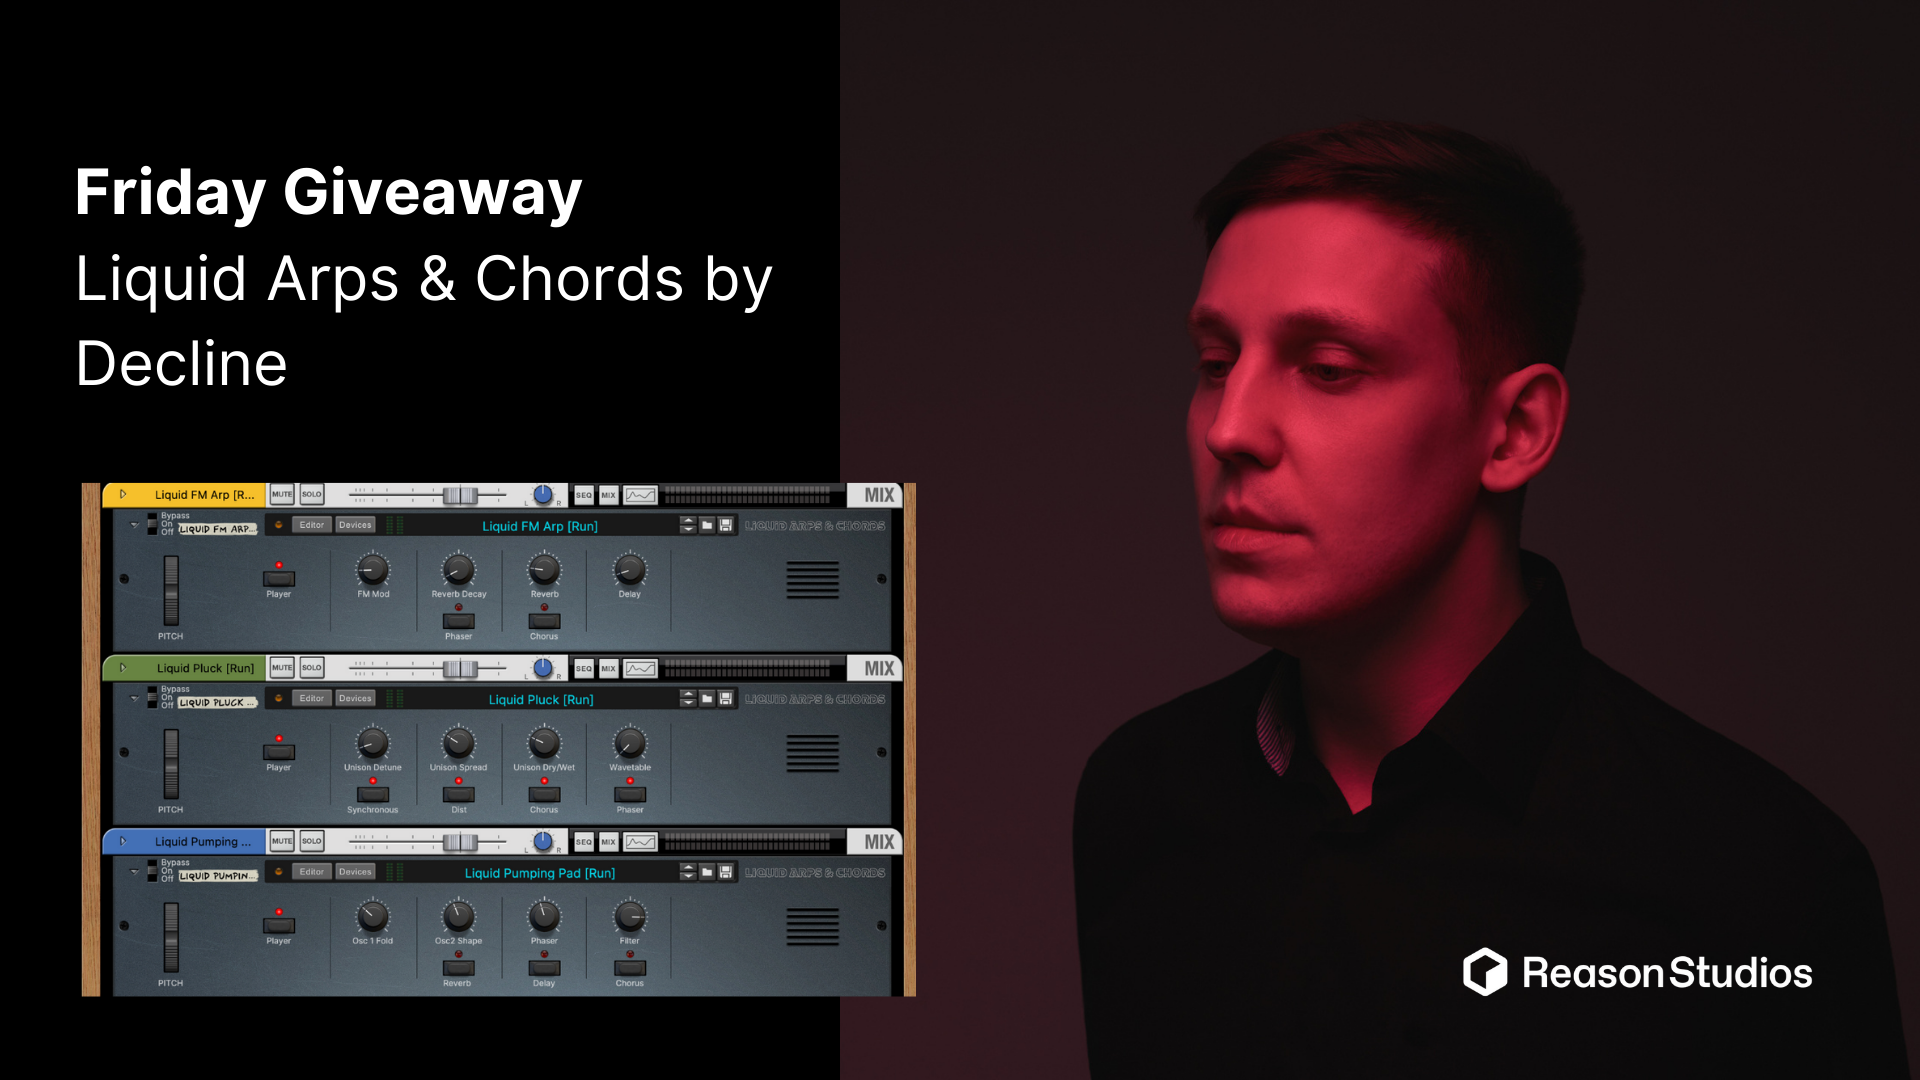 Friday Giveaway – Liquid Arps & Chords by Decline